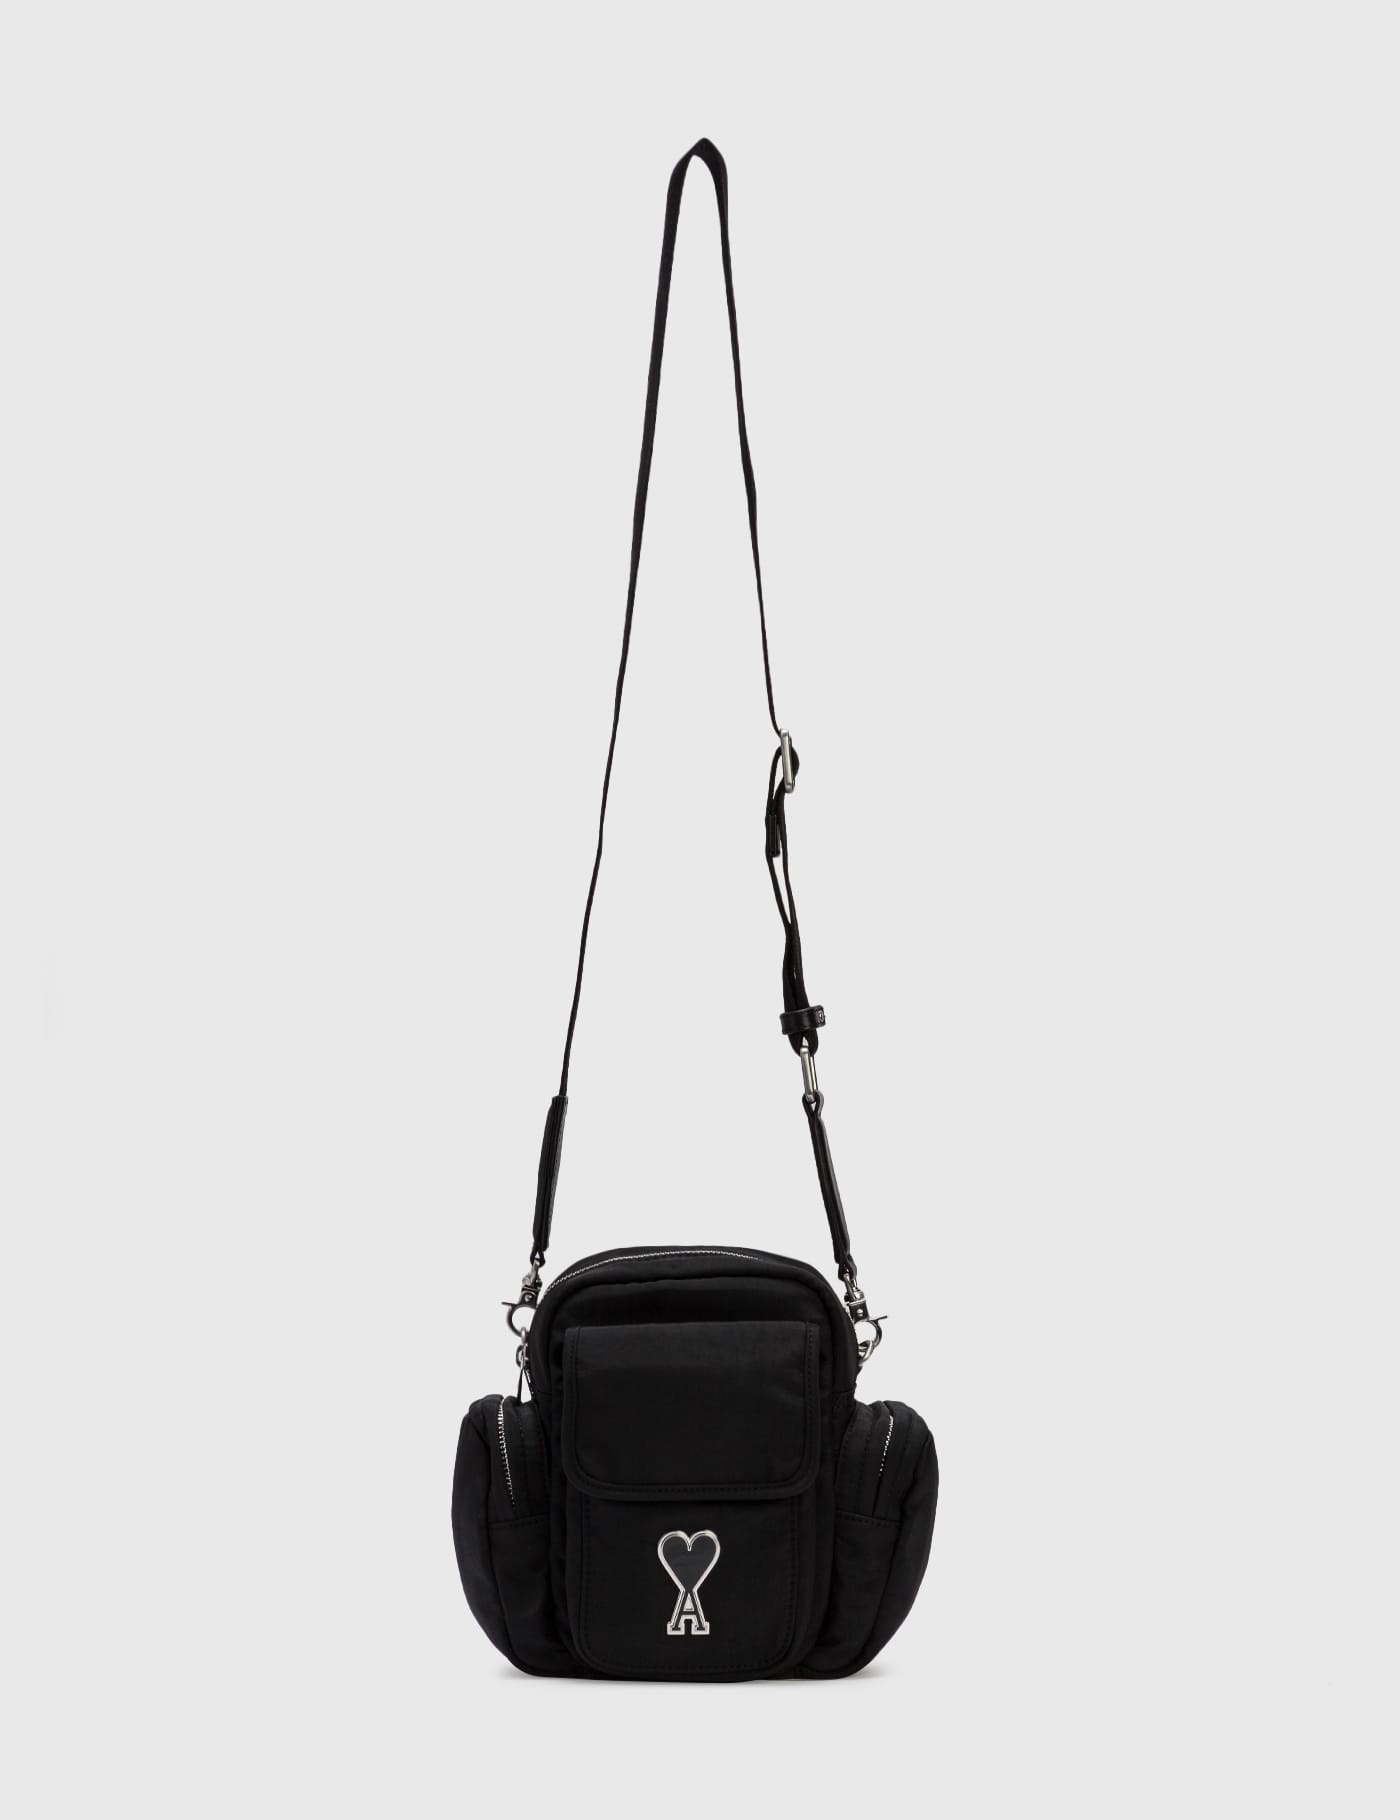 Ami - Adc Pocket Bag | HBX - Globally Curated Fashion and